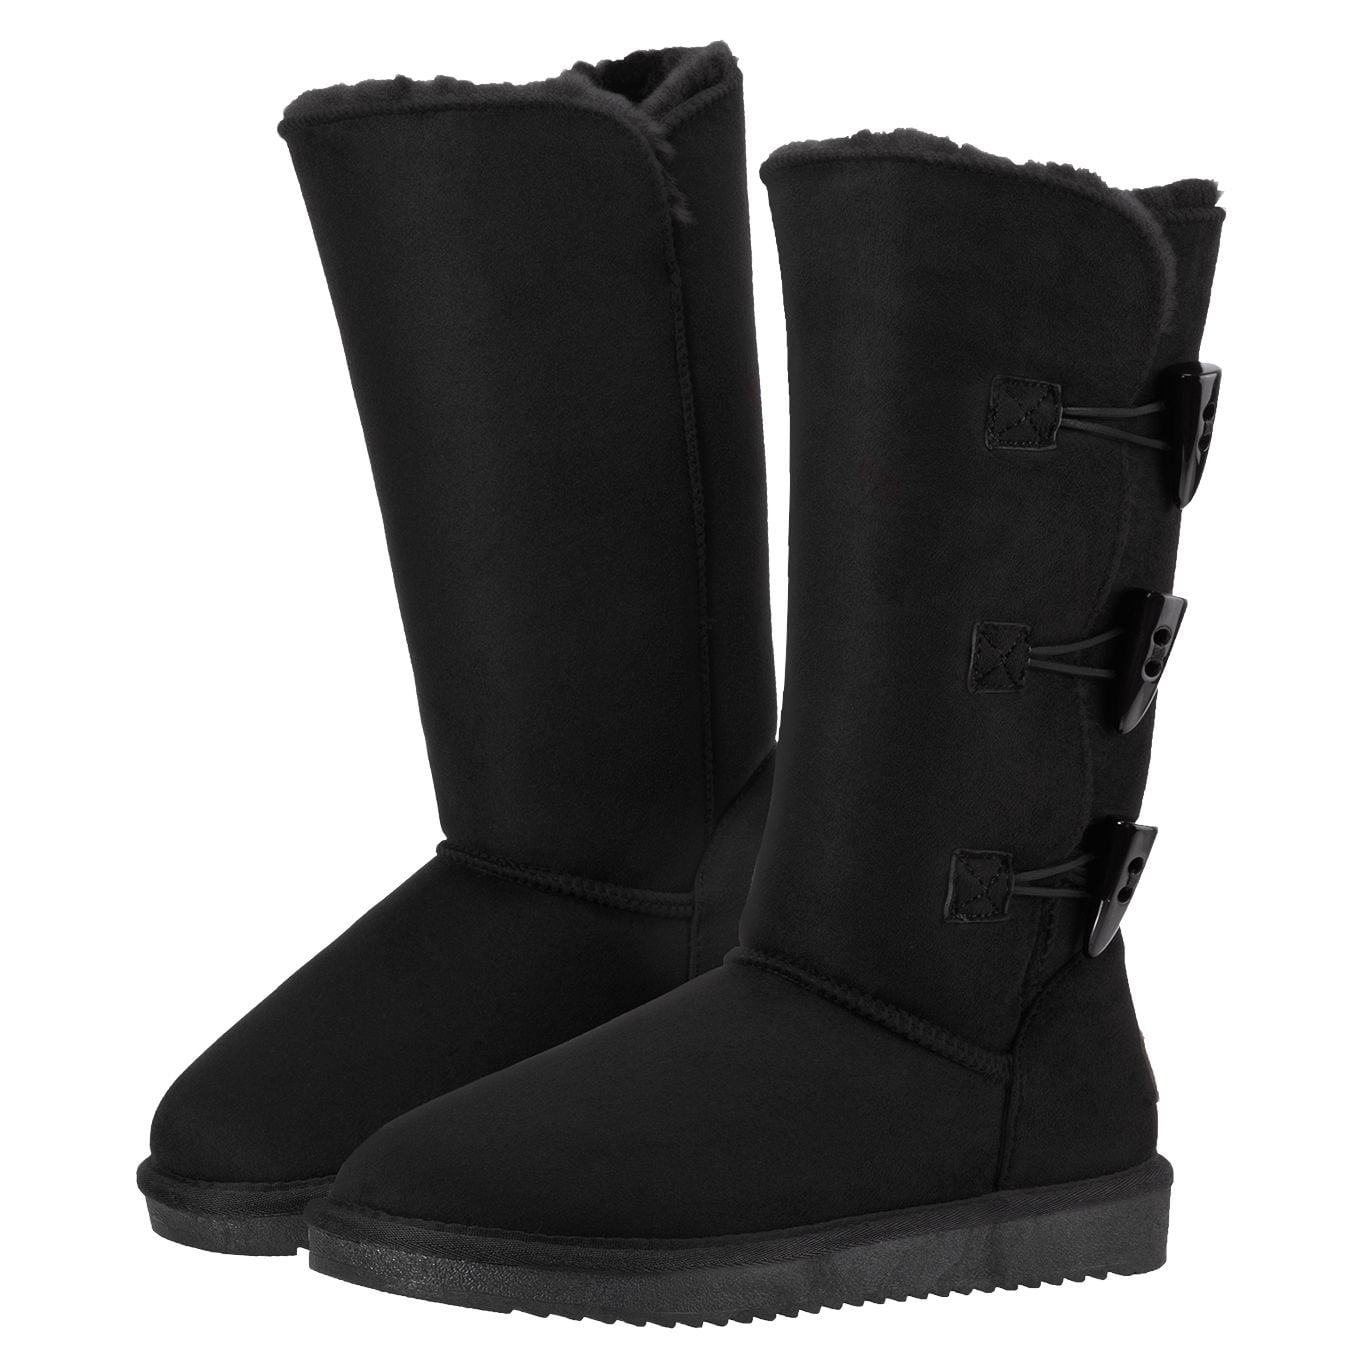 CAMEL Winter Tall Boots for Women Snow Boot Button Fashion Black Boots ...